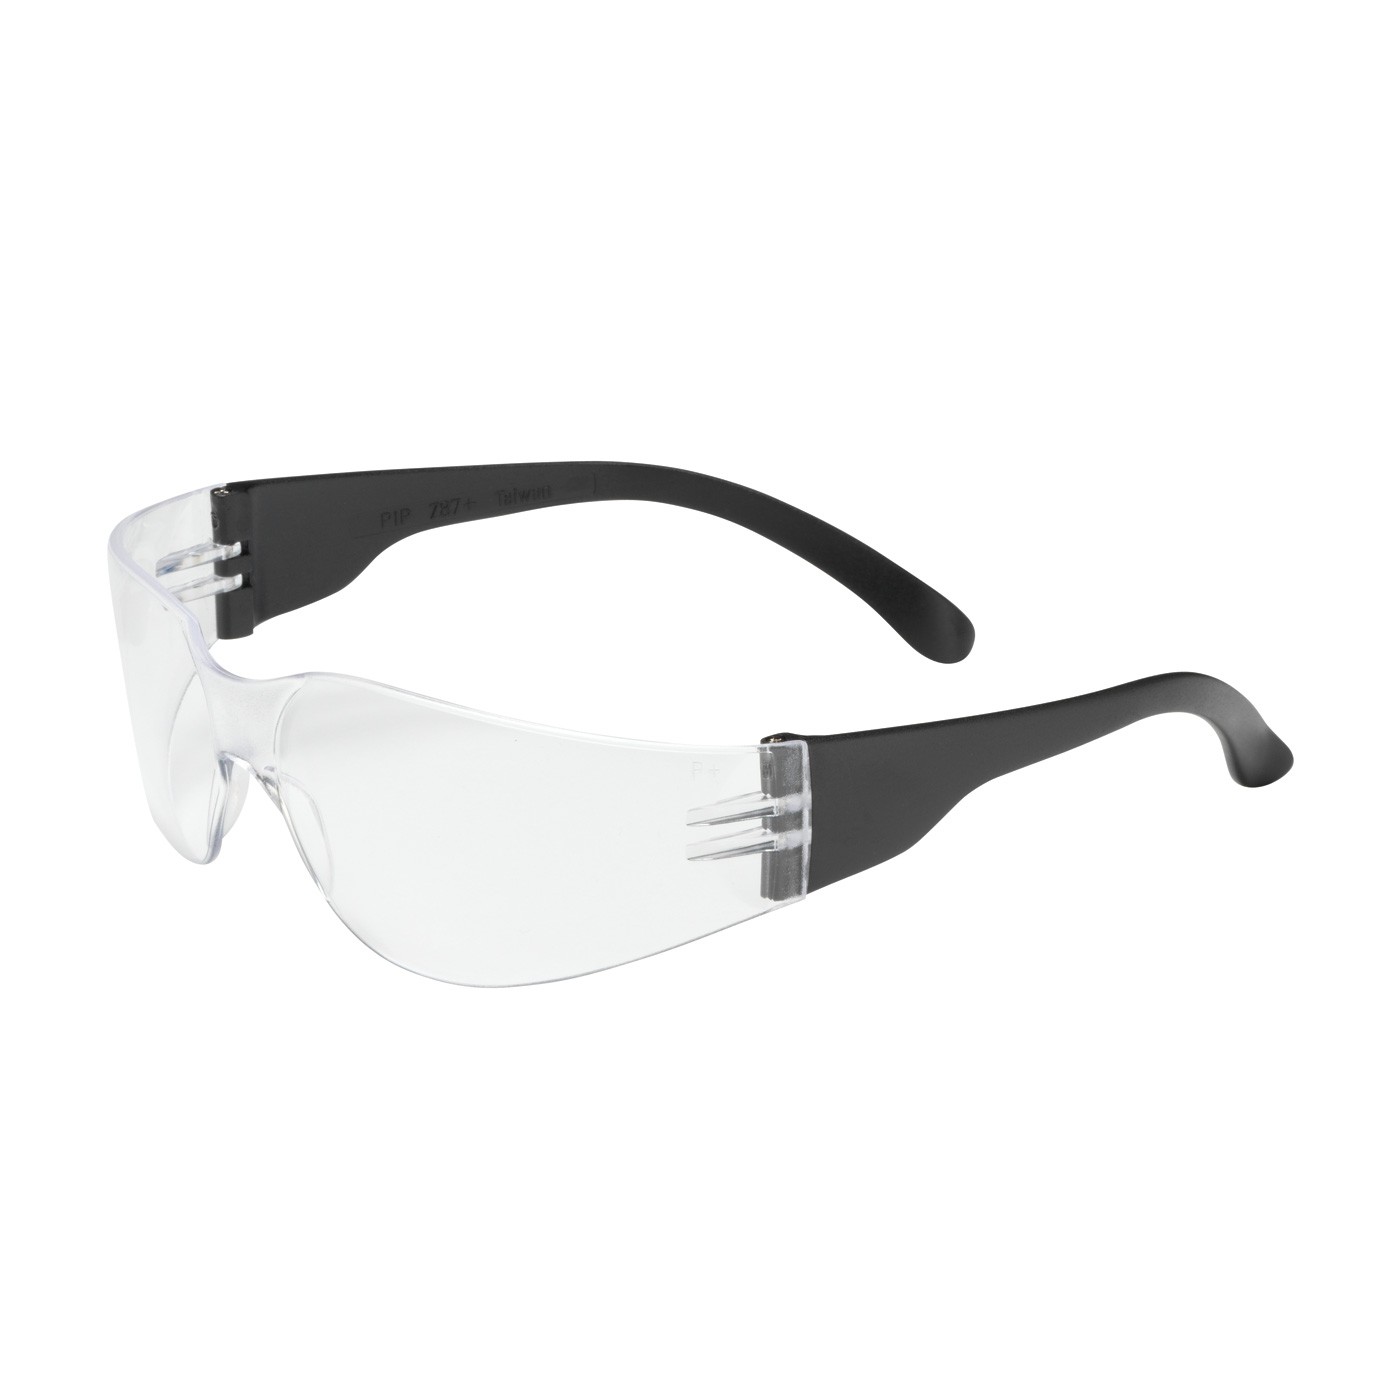 Zenon Z11sm™ Rimless Safety Glasses with Black Temple, Clear Lens and Anti-Scratch / Anti-Fog Coating  (#250-00-0920)